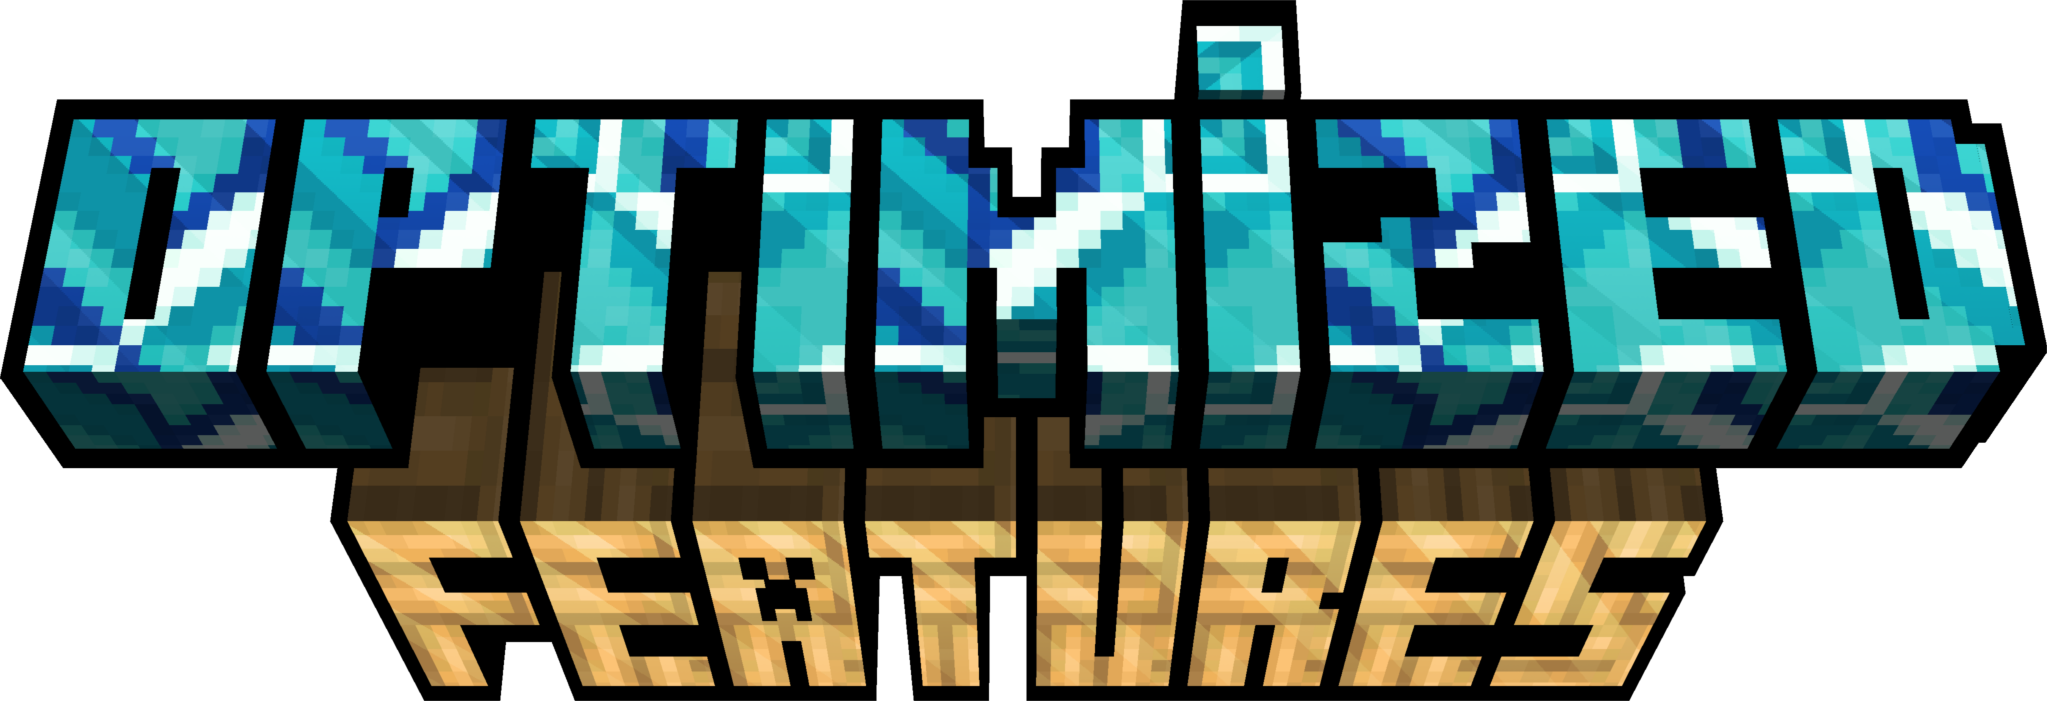 The big logo of the modpack. It says 'Optimized Features'. 'Optimized' has light blue glazed terracotta as an background and 'Features' has an background with bamboo mosaic with a slight hue. The 'i' in 'Optimized' also has an outstanding dot.